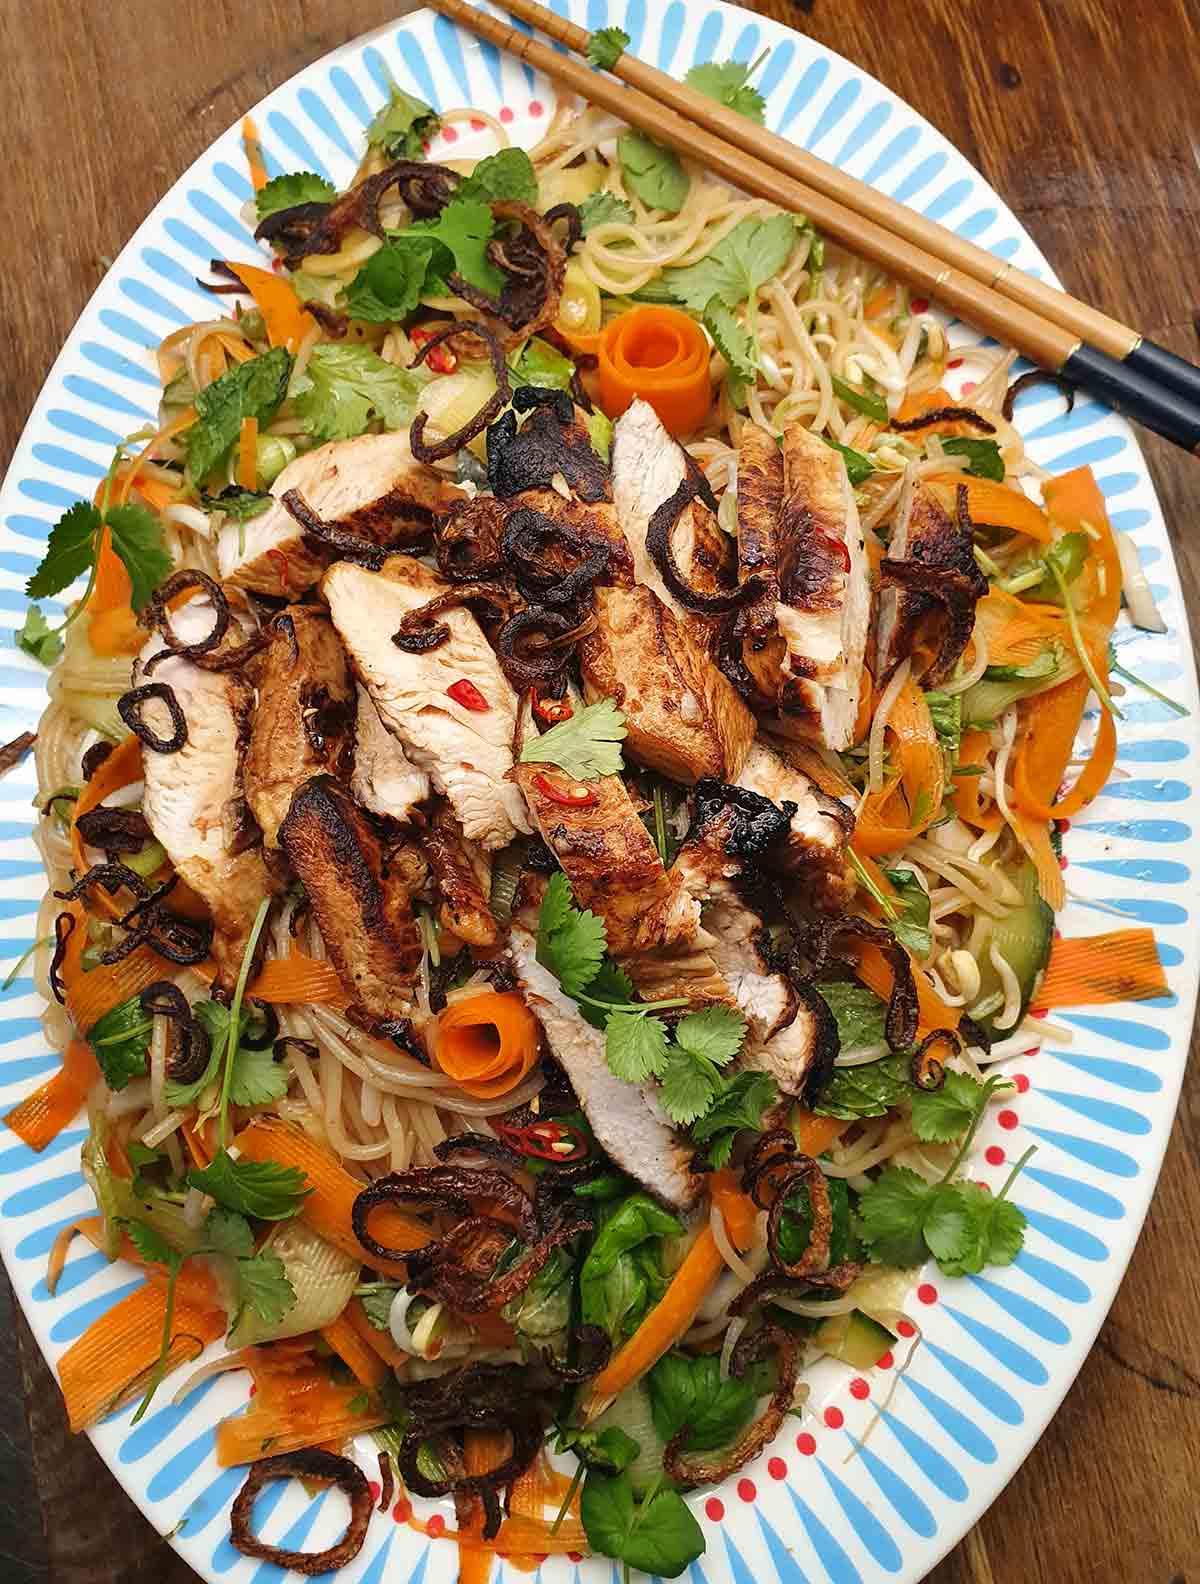 A blue and white oval platter with vermicelli noodles, chicken, raw vegetables and chopsticks on the side.